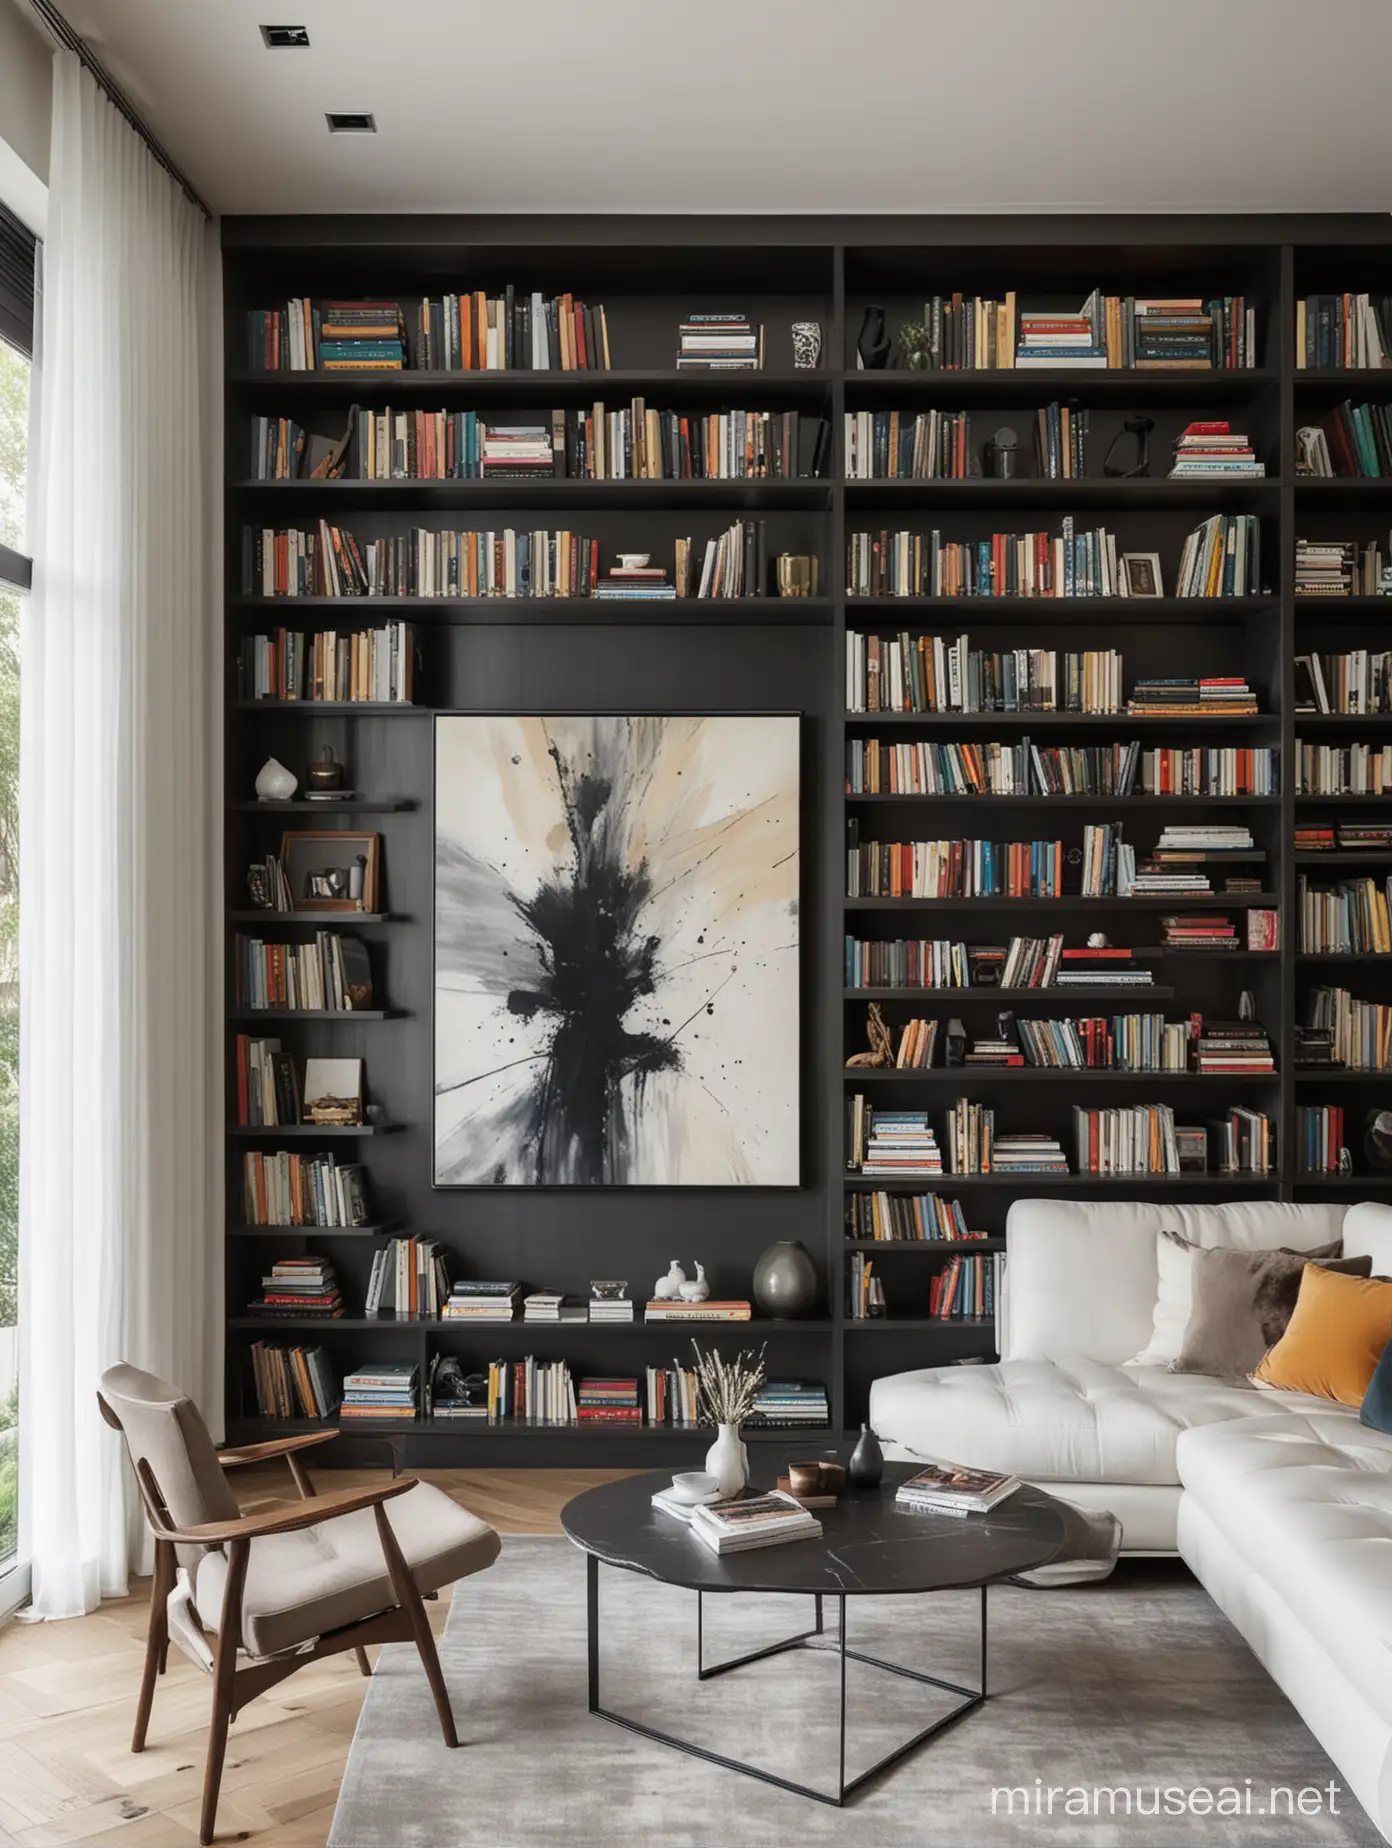 This study blends modern artistic elements, with abstract art pieces adorning the walls and shelves showcasing books with a strong design sense. The overall design is sleek and elegant, showcasing the unique charm of modern art.